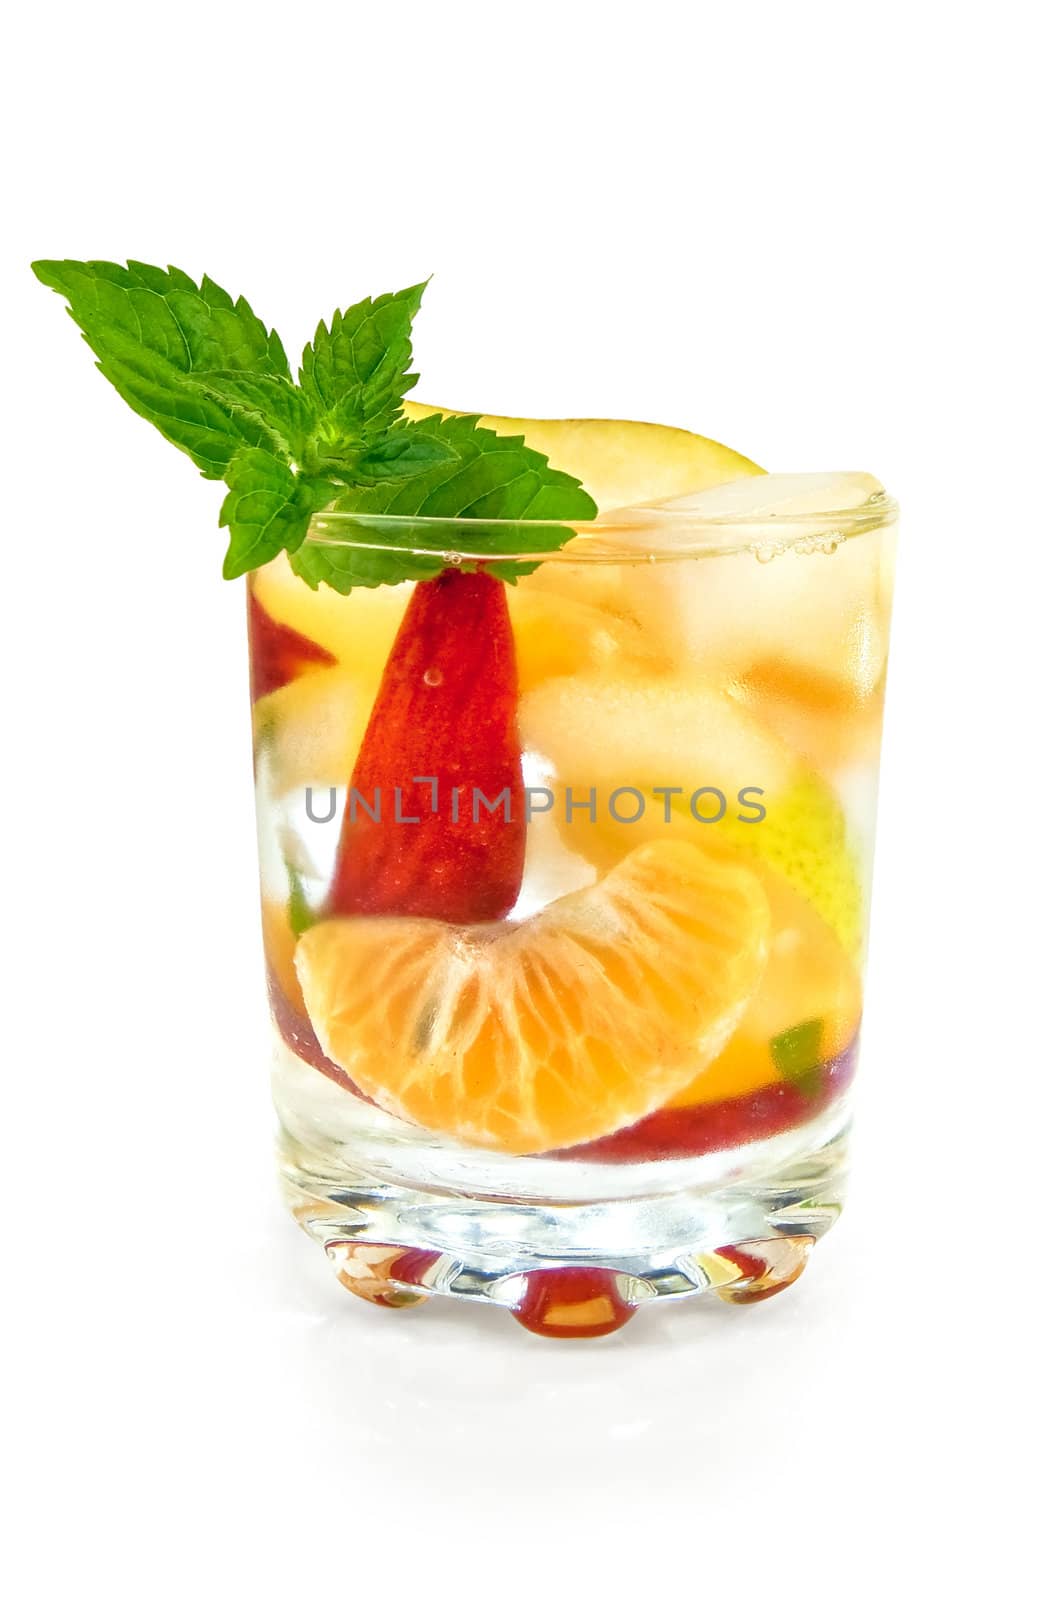 Fruit cocktail of pear, tangerine, peach and mint with ice in a glass isolated on white background